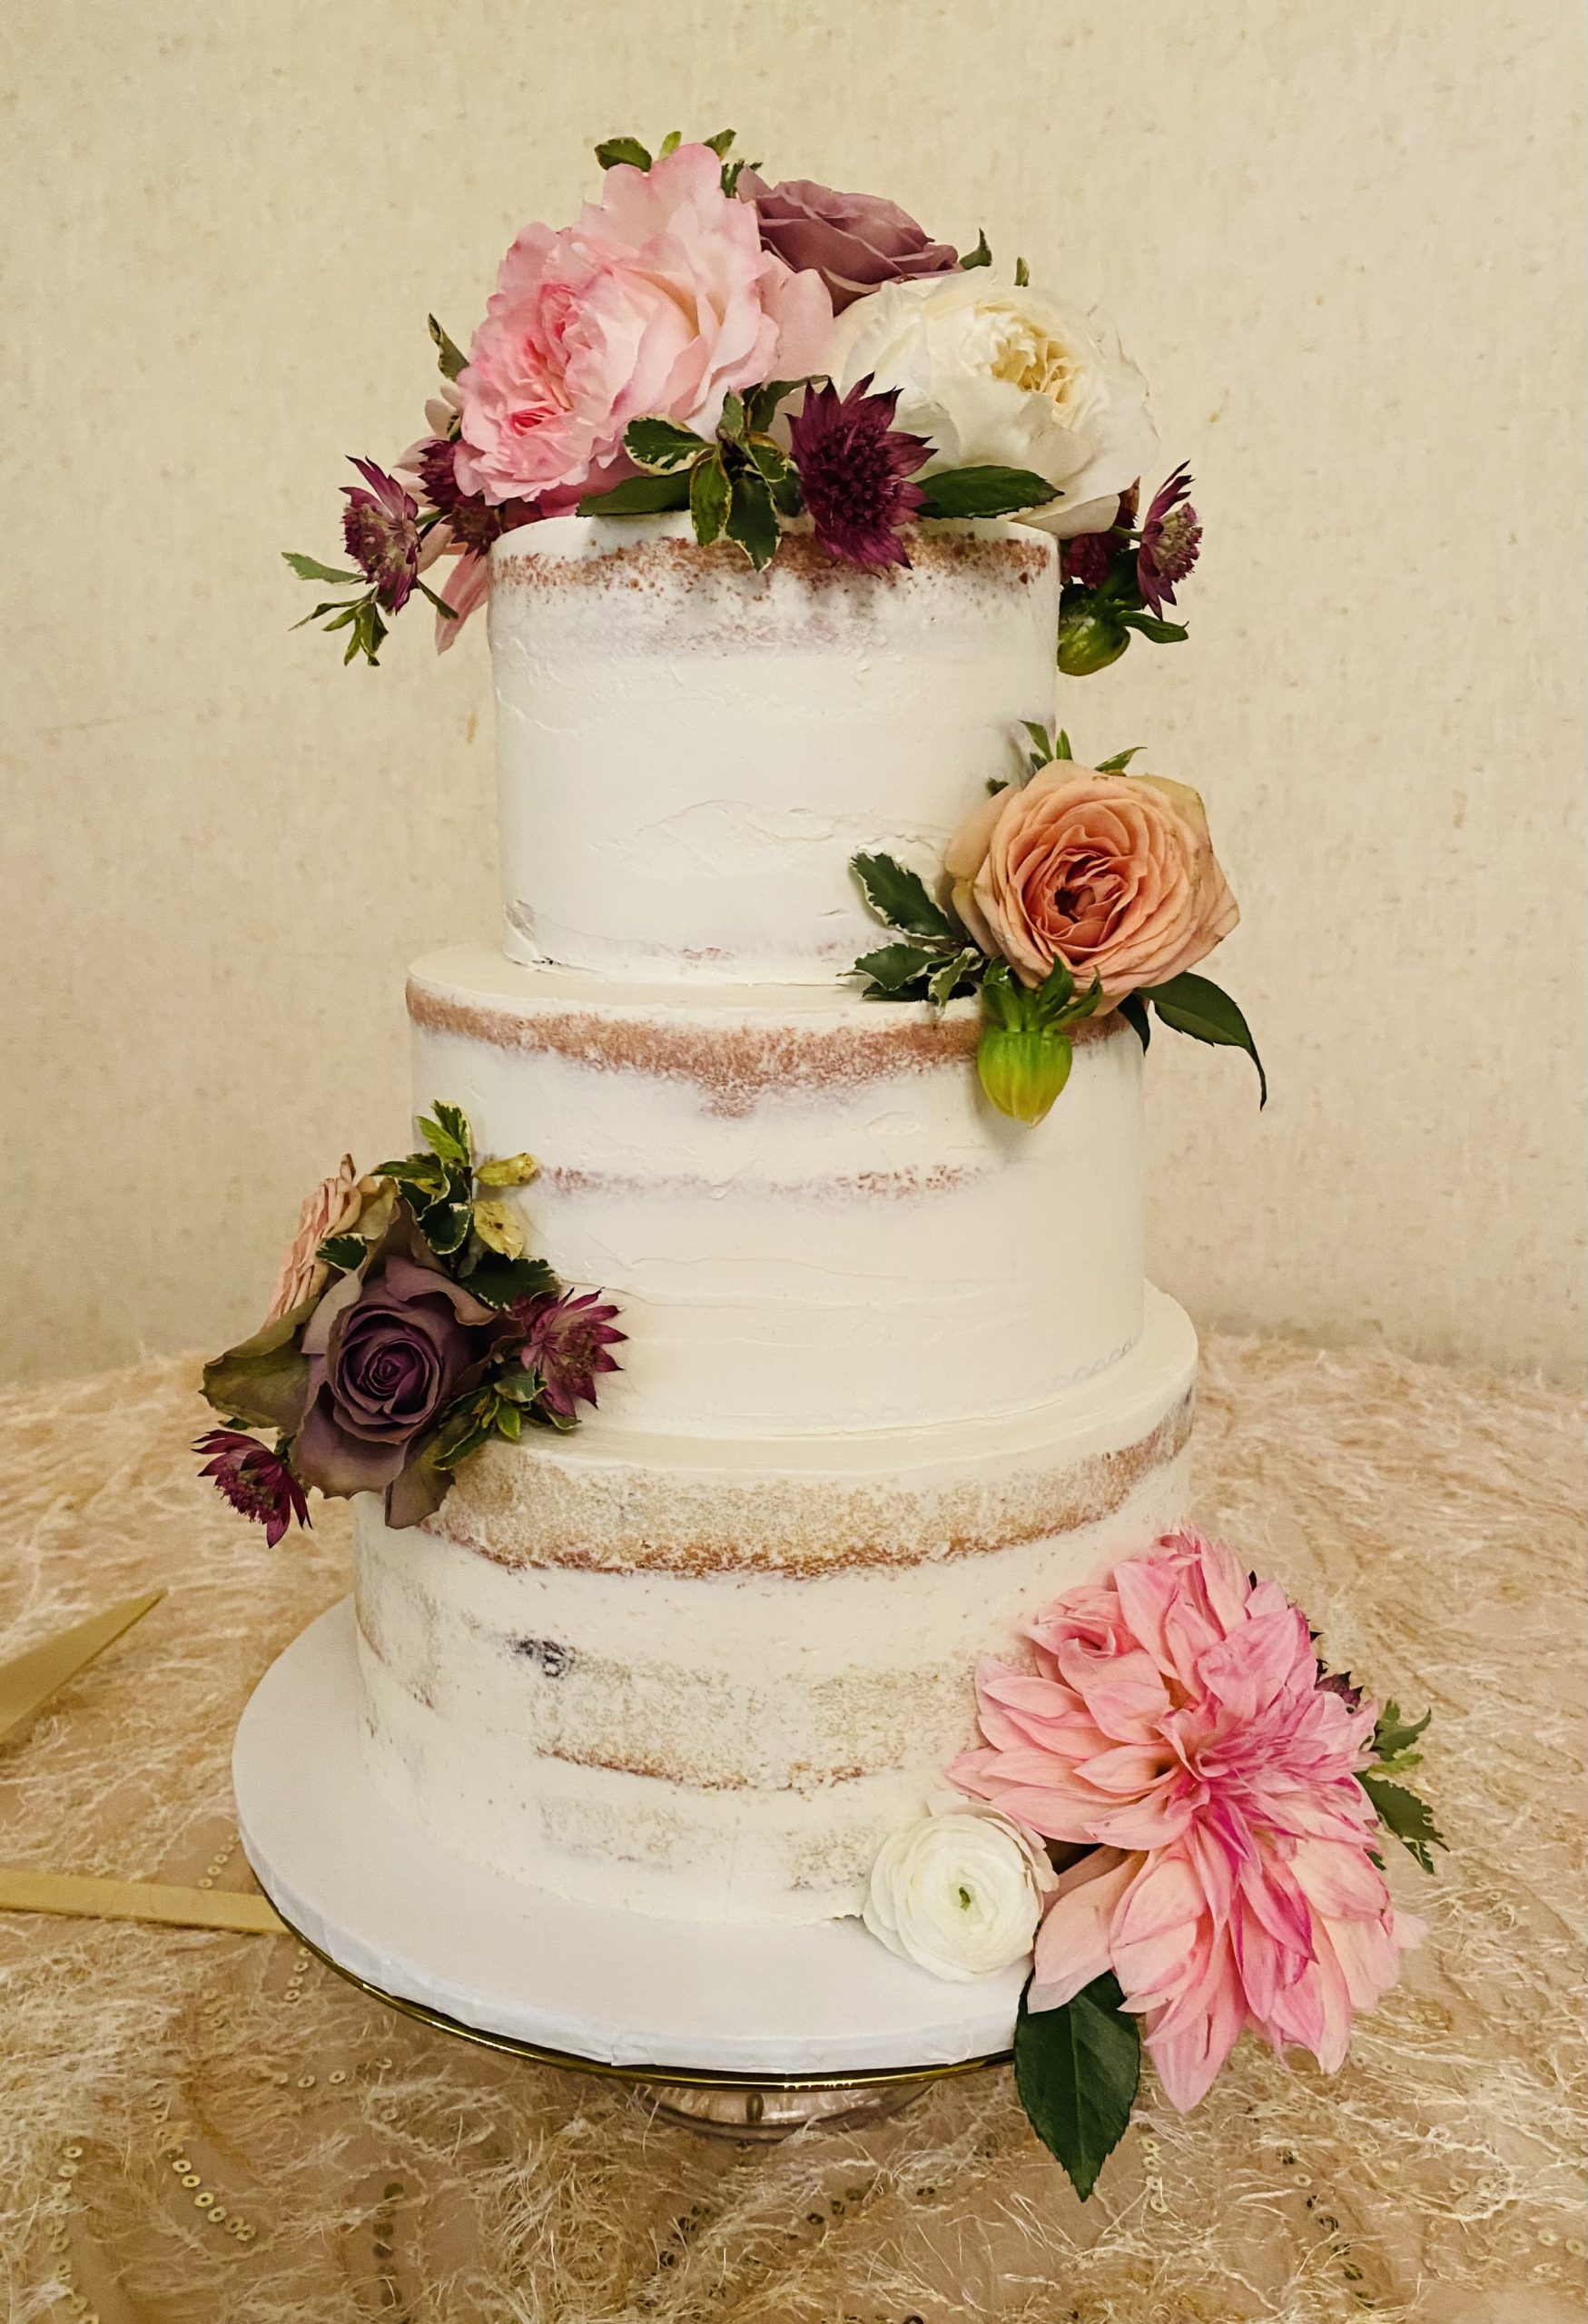 A beautiful 3-tier naked cake wedding cake with live flowers from Village Patisserie in Toledo, Ohio